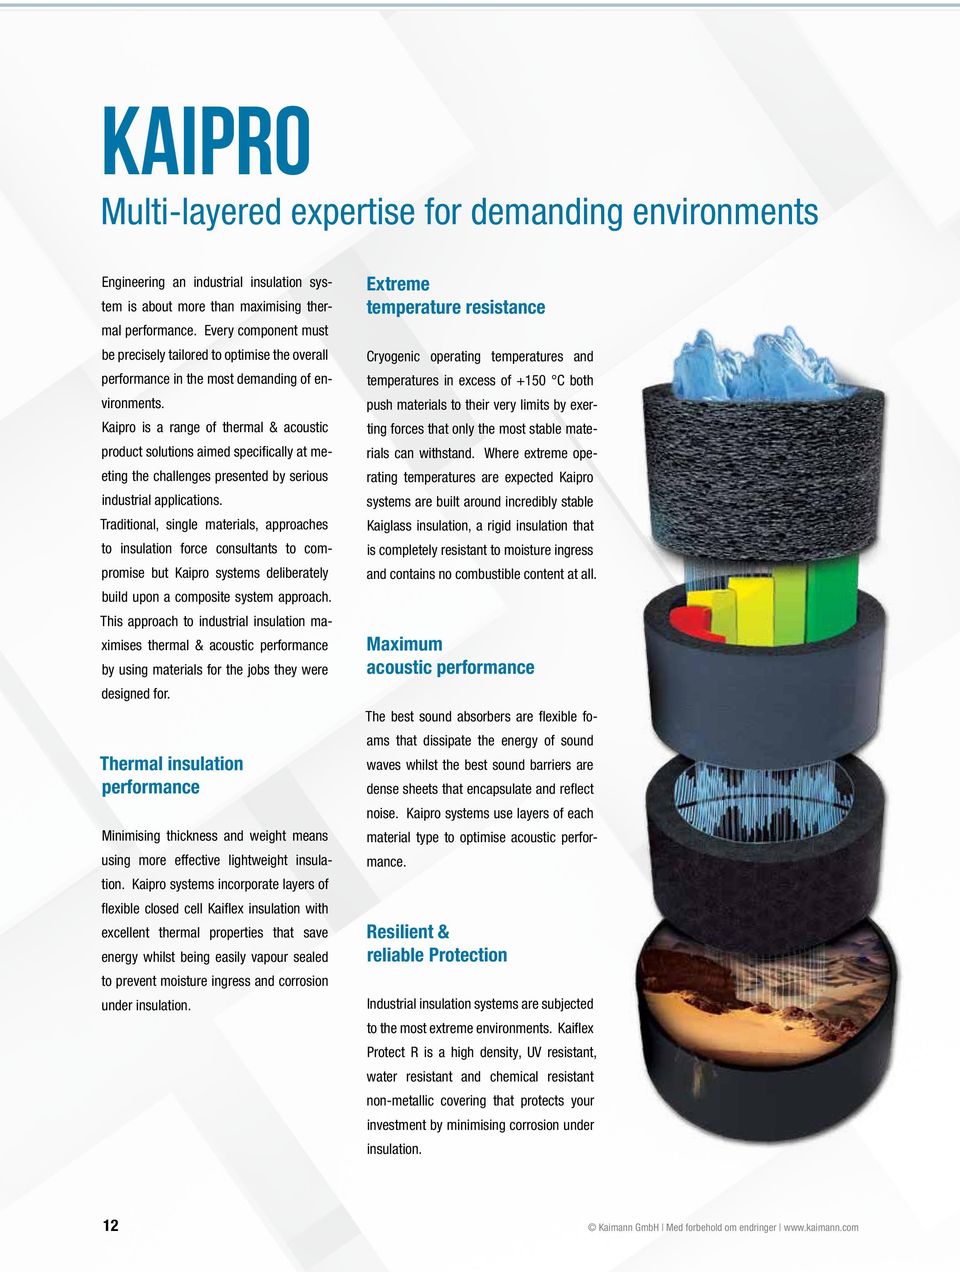 Kaipro is a range of thermal & acoustic product solutions aimed specifically at meeting the challenges presented by serious industrial applications.